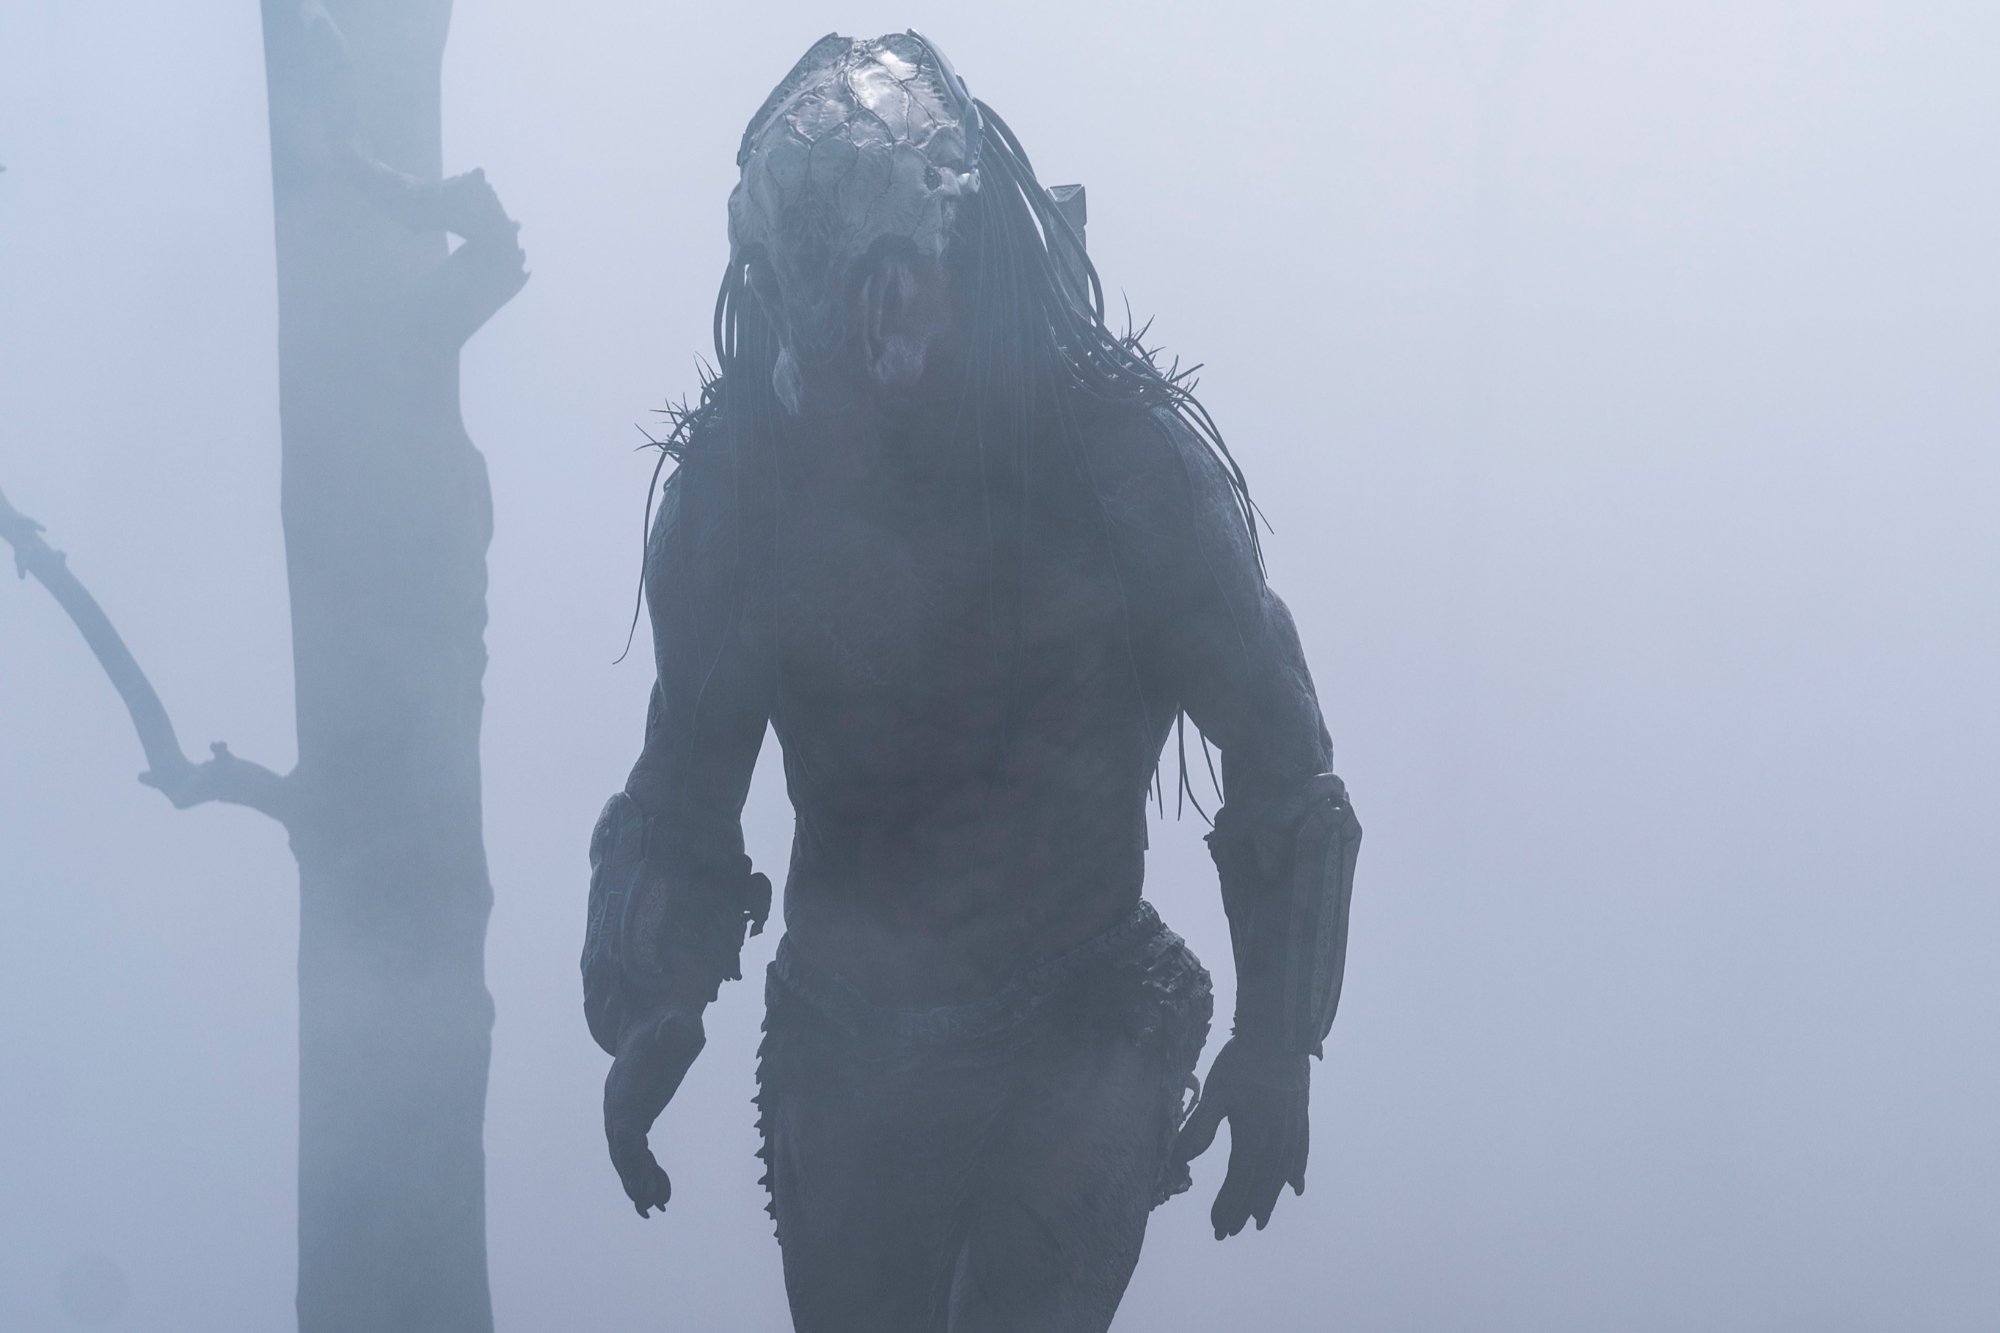 'Prey' Dane DiLiegro as the Predator, hunting humans. He's standing in the Predator costume surrounded by mist and a single tree in the background.